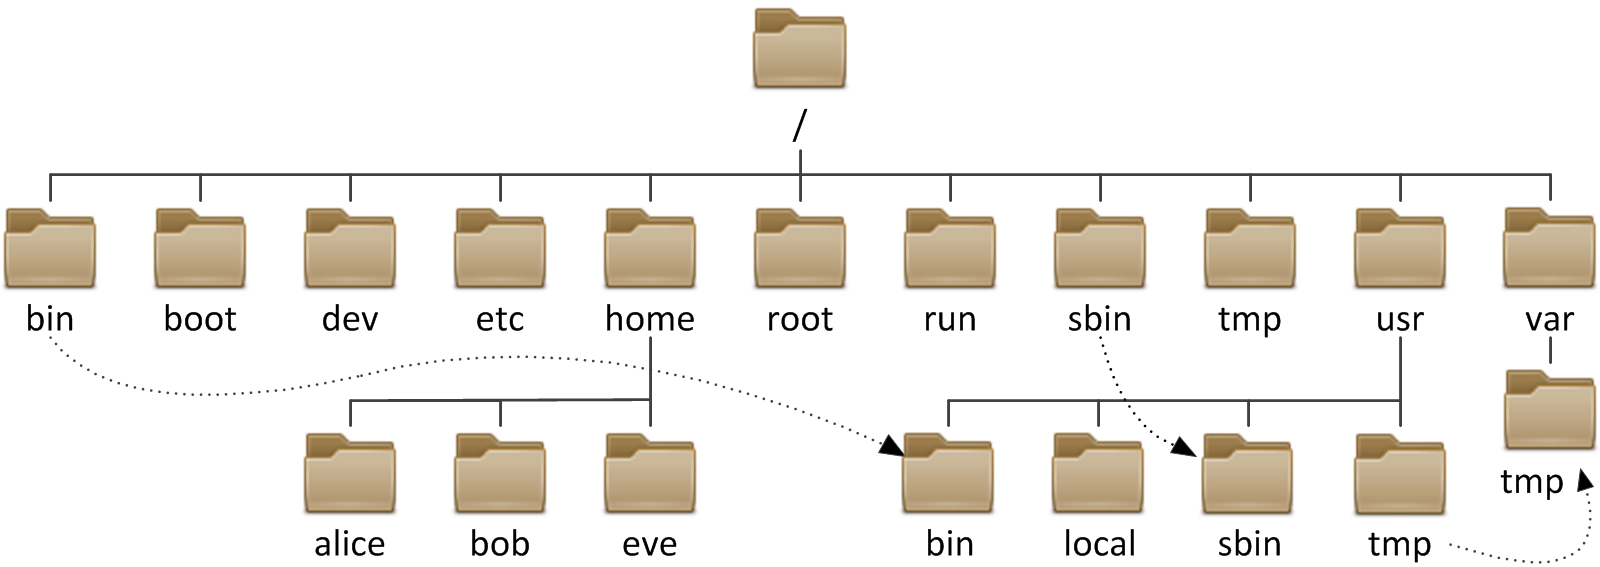 linux filesystem hierarchy.png